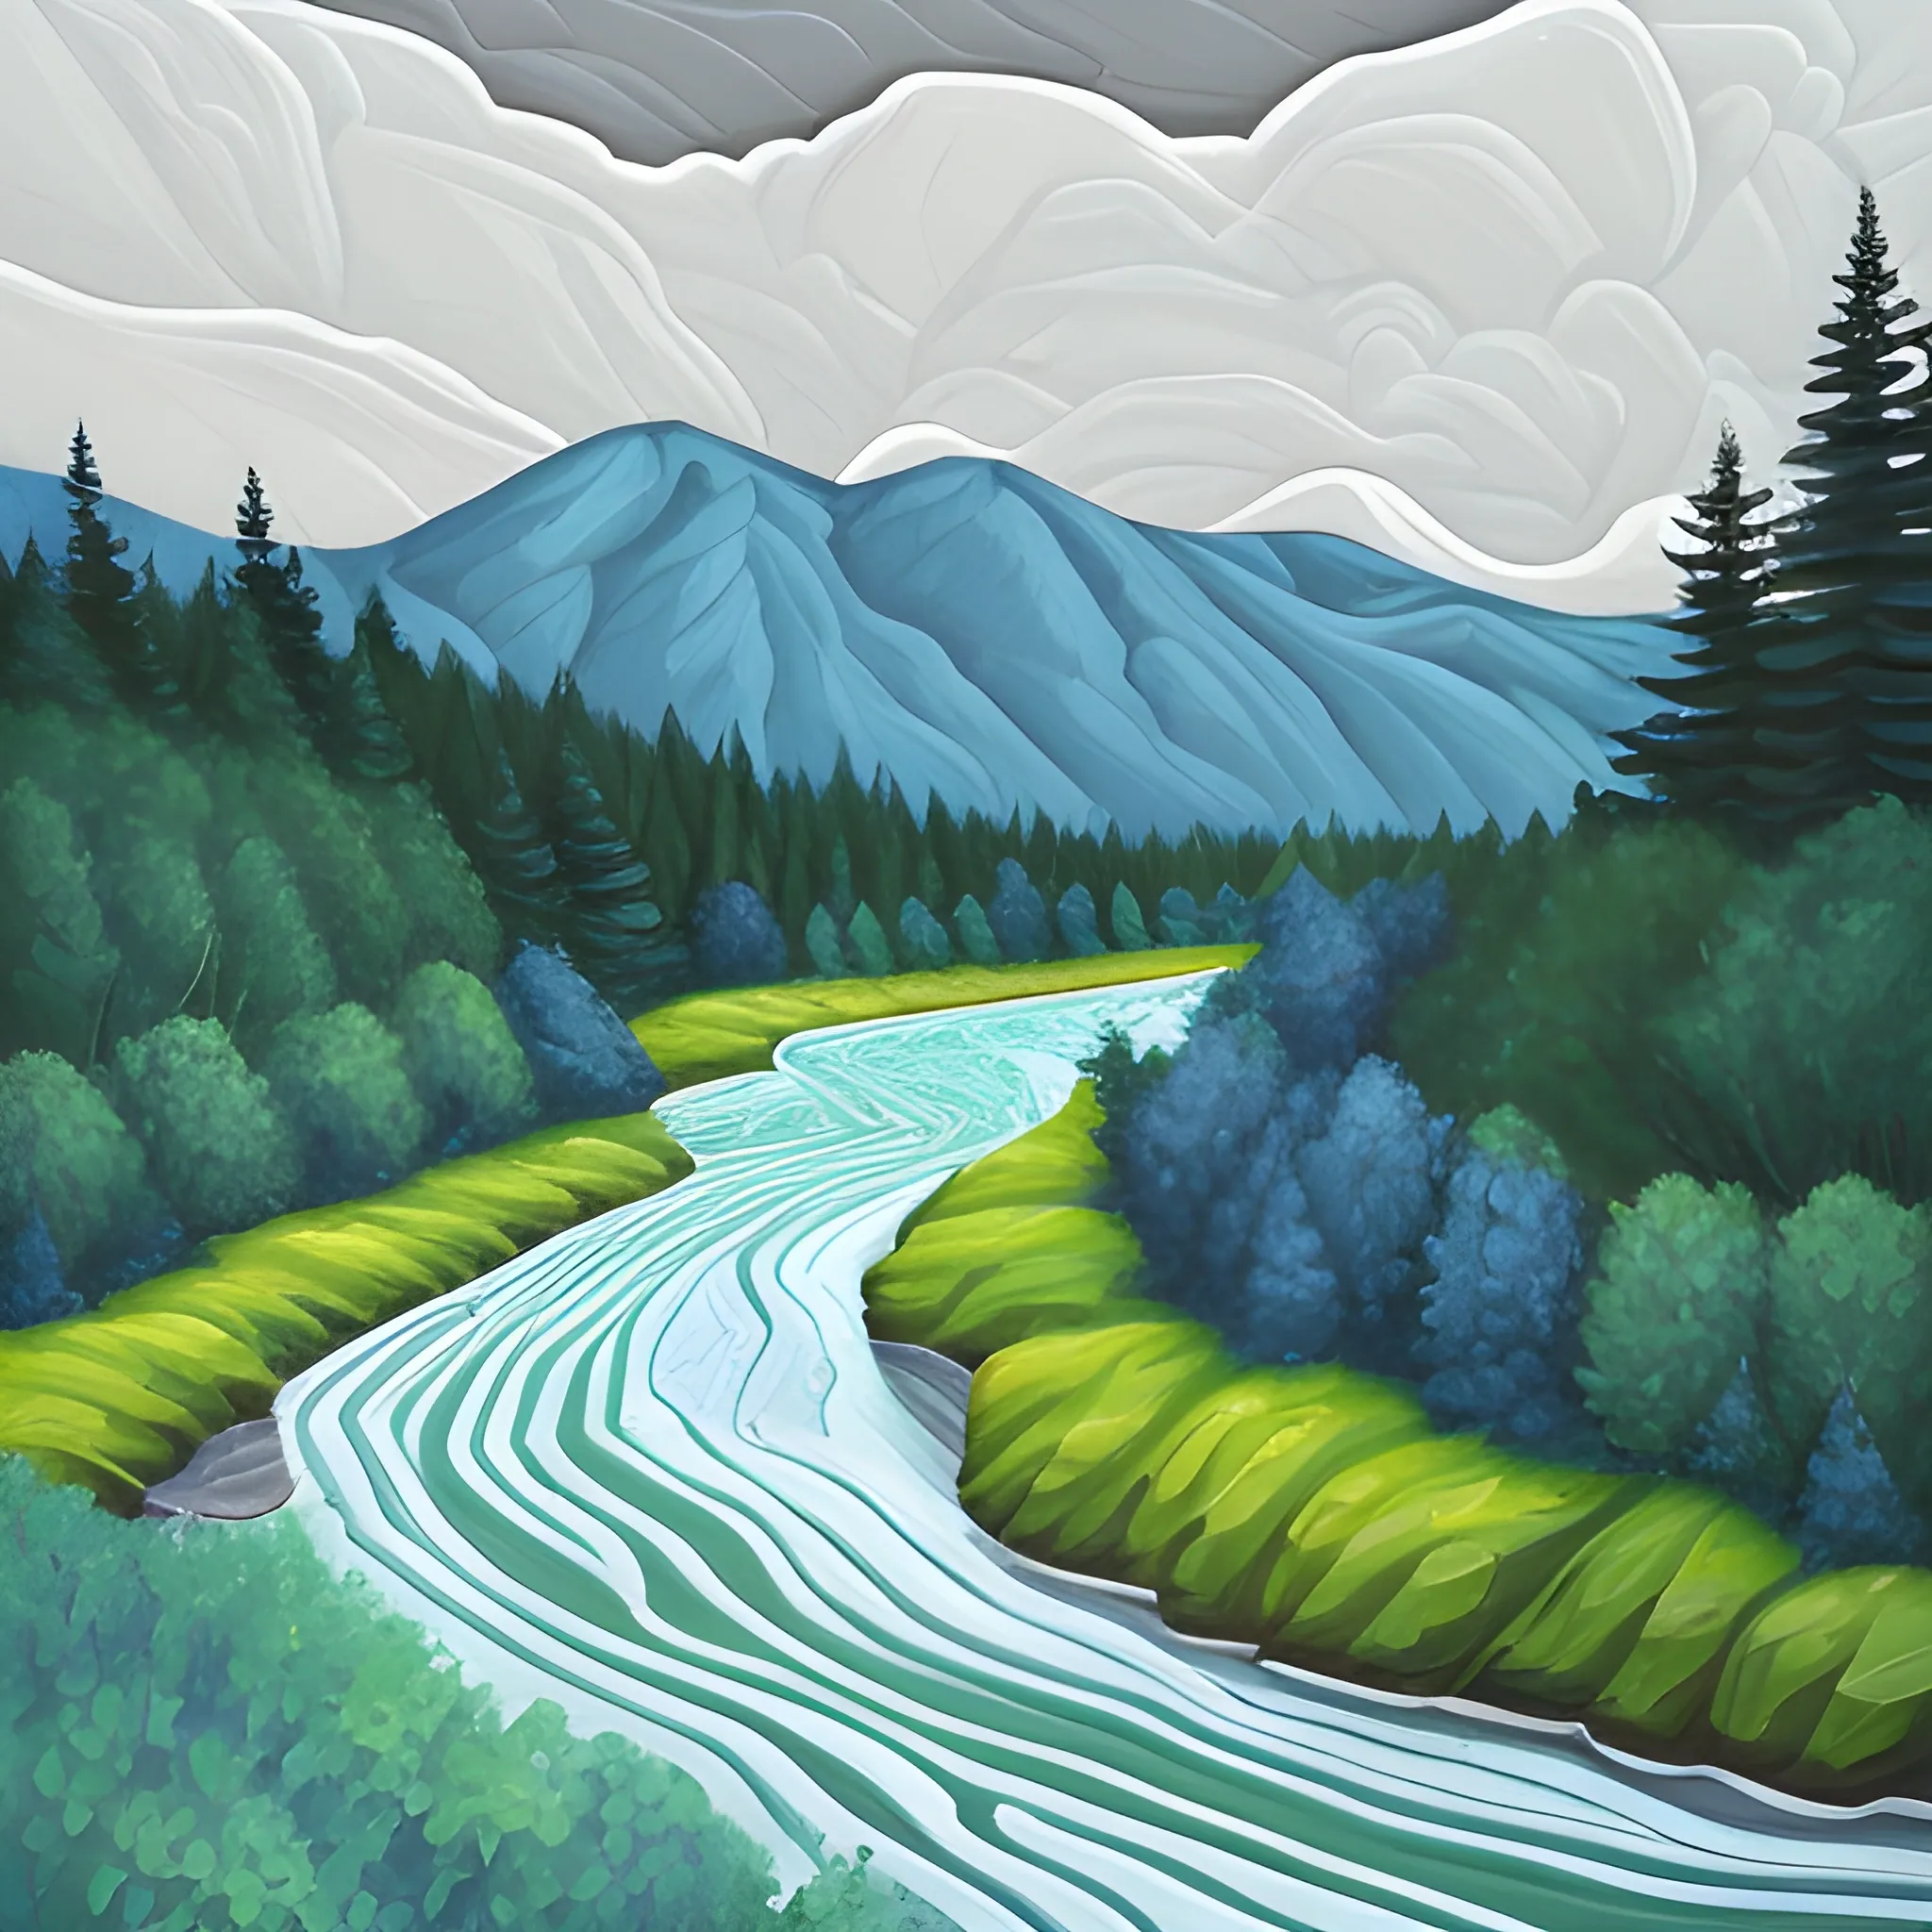 A stylized mountain landscape in a vector art style. A serene scene with a river winding through the mountains, featuring varied peaks in shades of blue and gray in the background. Evergreen trees line the riverbanks. The sky includes subtle cloud formations, creating a calm atmosphere. The image has a grainy texture to give it a slightly rough, handcrafted feel. Use a color palette of blues, greens, and soft pastels, Oil Painting